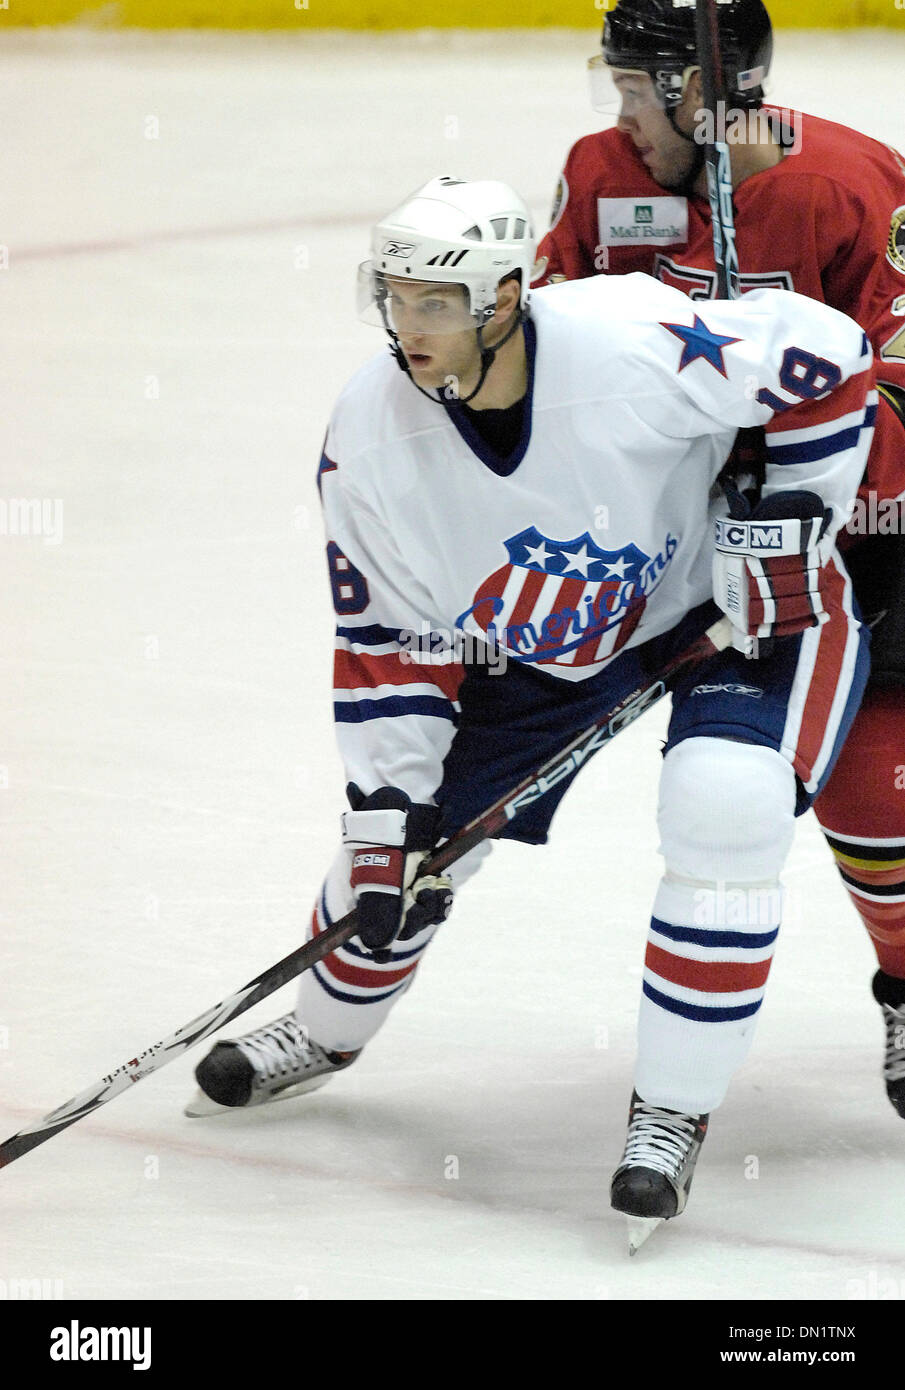 October 13, 2006: AHL - Rochester right wing Rob Globke (18) in action aginst Binghamton - Binghamton Senators at Rochester Americans at The Blue Cross Arena in Rochester, New York. Rochester defeated Binghamton in a shootout.(Credit Image: © Alan Schwartz/Cal Sport Media) Stock Photo